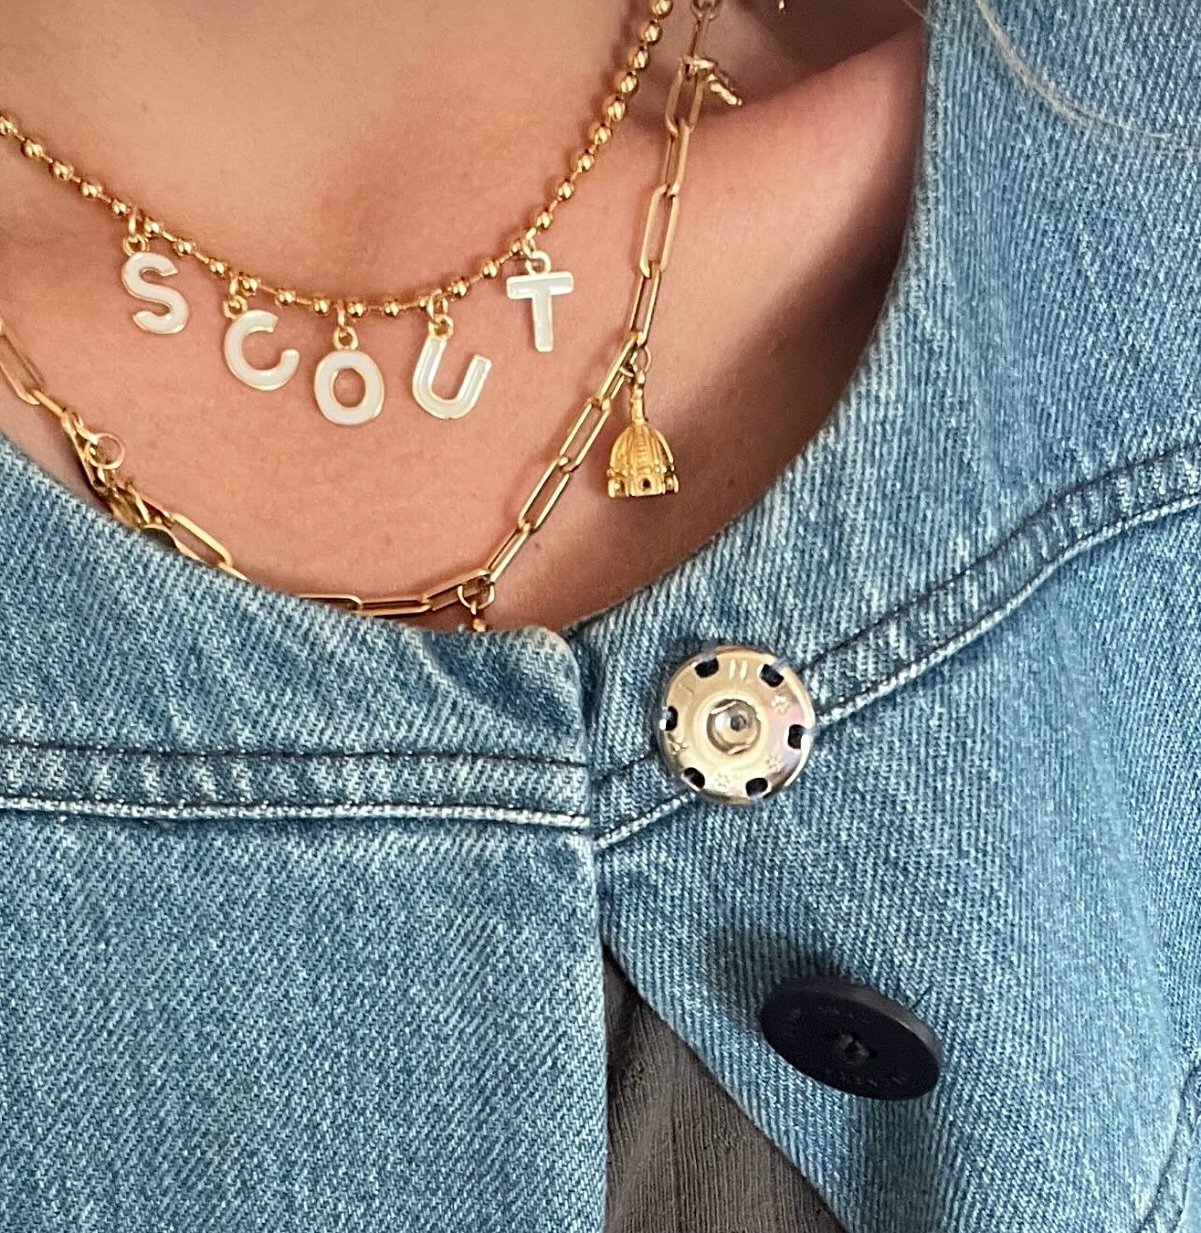 It&rsquo;s always an honor to work with clients &amp; create custom pieces of their wishes. The lovely @nellblaggcreative wanted a playful, summer-friendly necklace with her daughter&rsquo;s name, that also layered in with her other faves. Voil&agrav